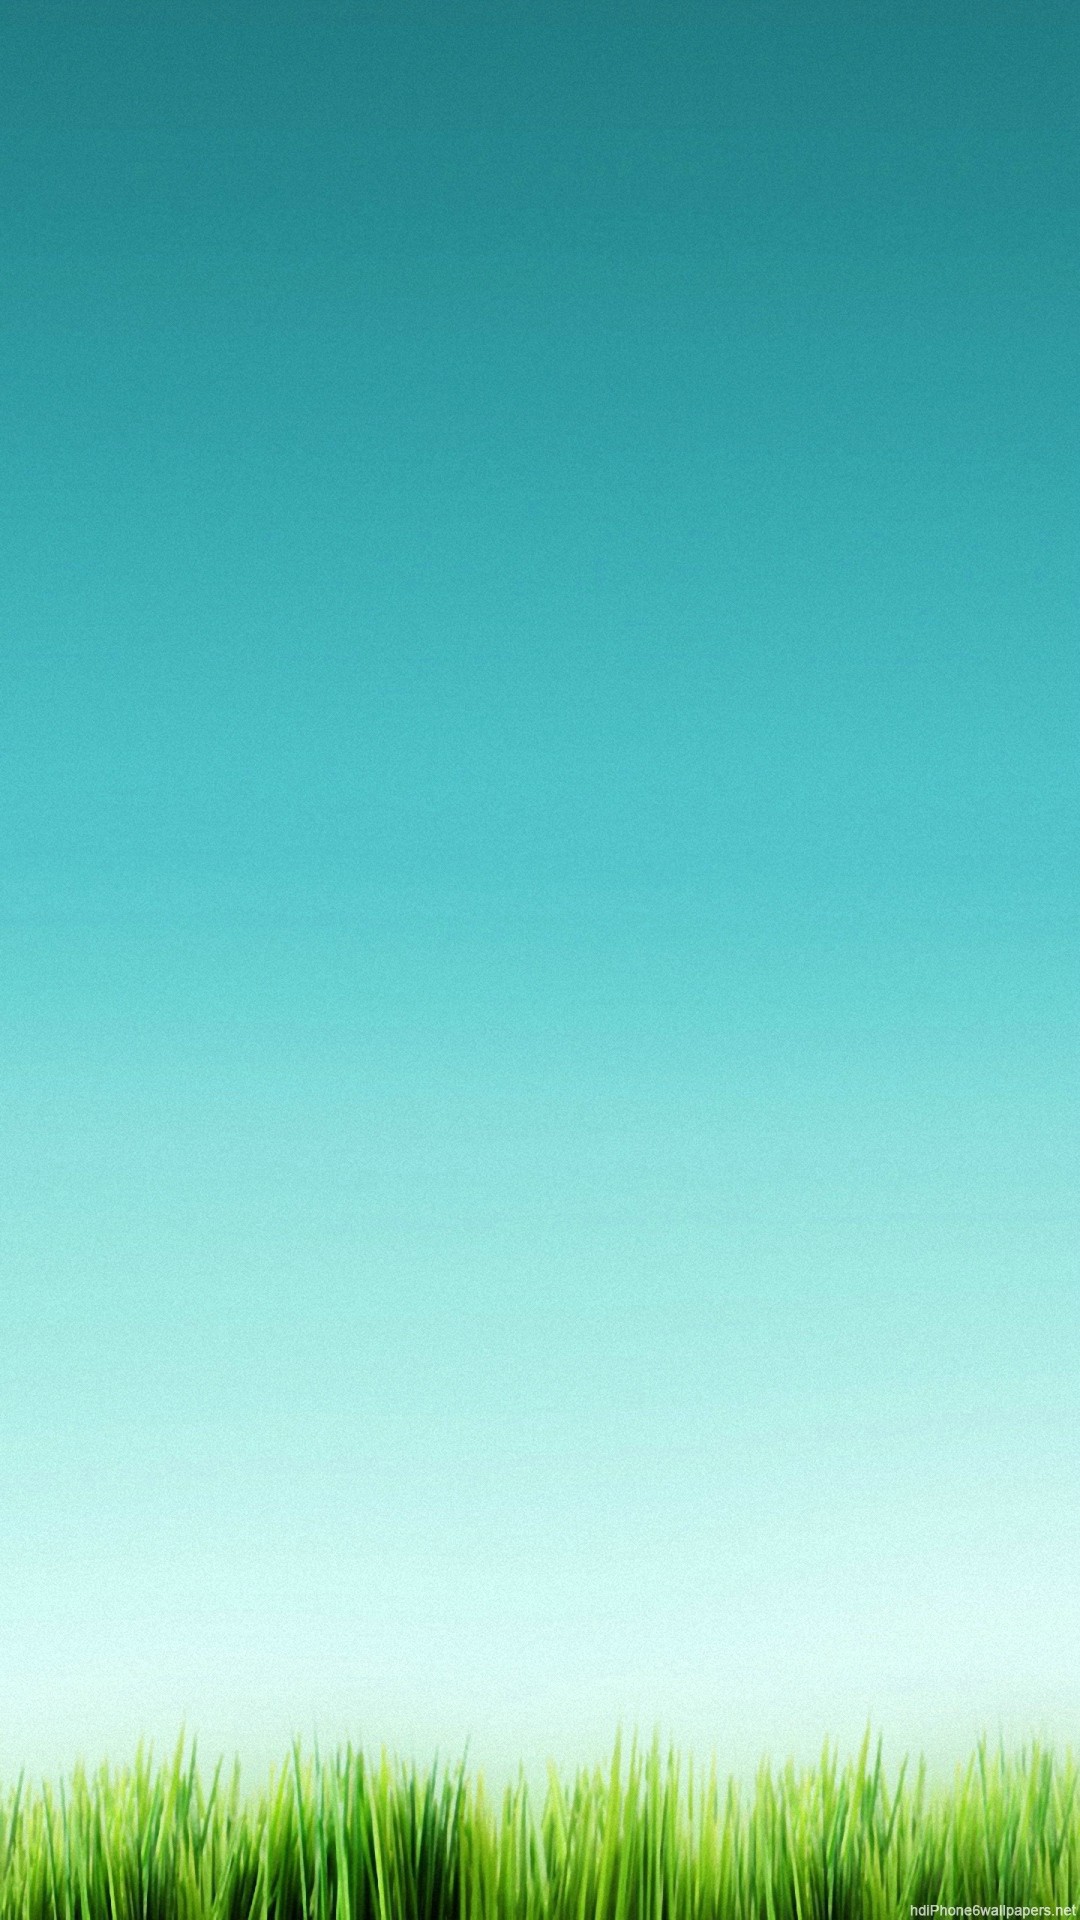 1080x1920  grass field sky green iPhone 6 wallpapers HD - 6 Plus backgrounds